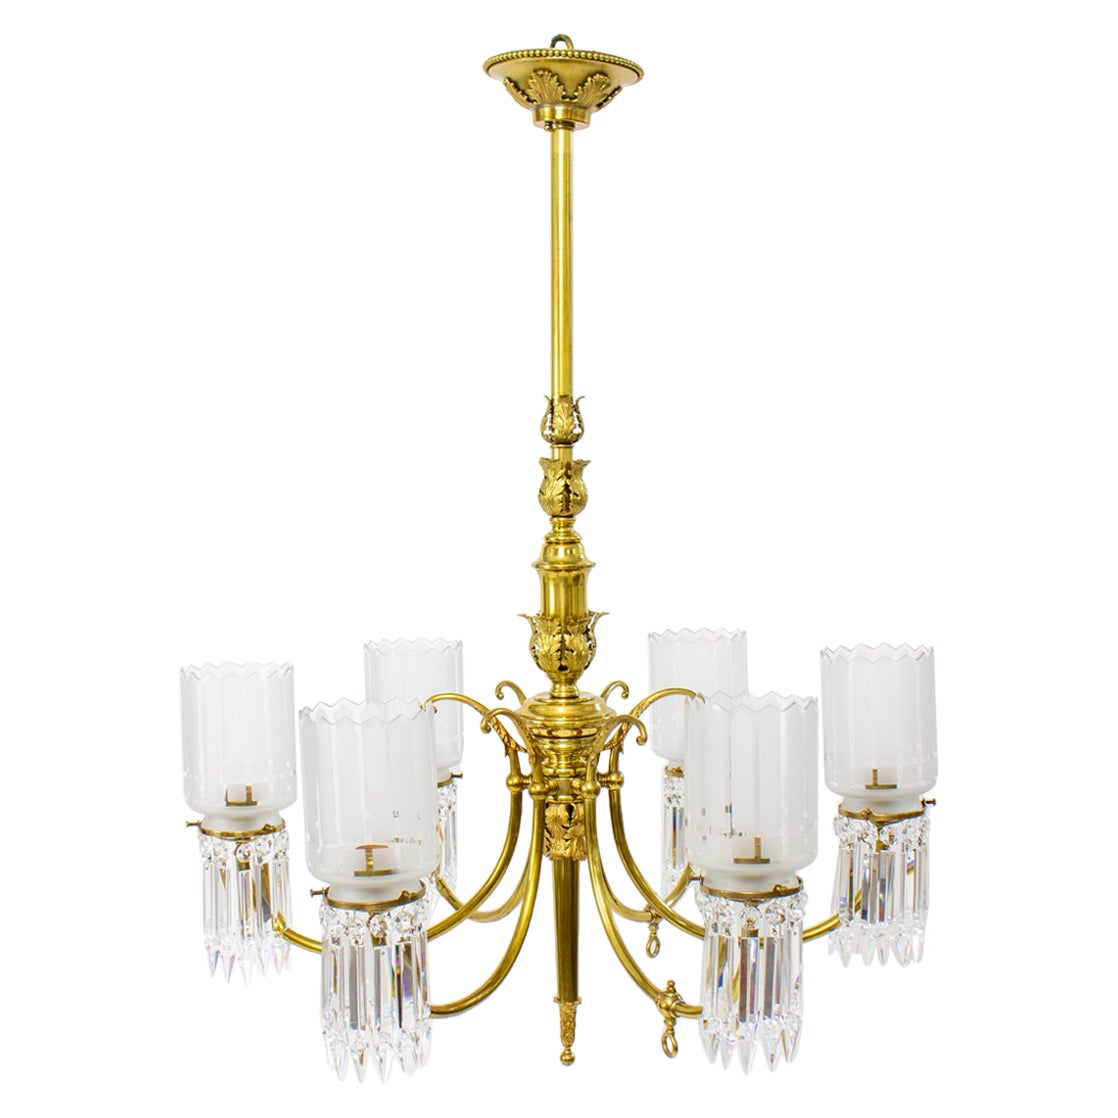 19th Century Gas and Electric Brass and Crystal Chandelier